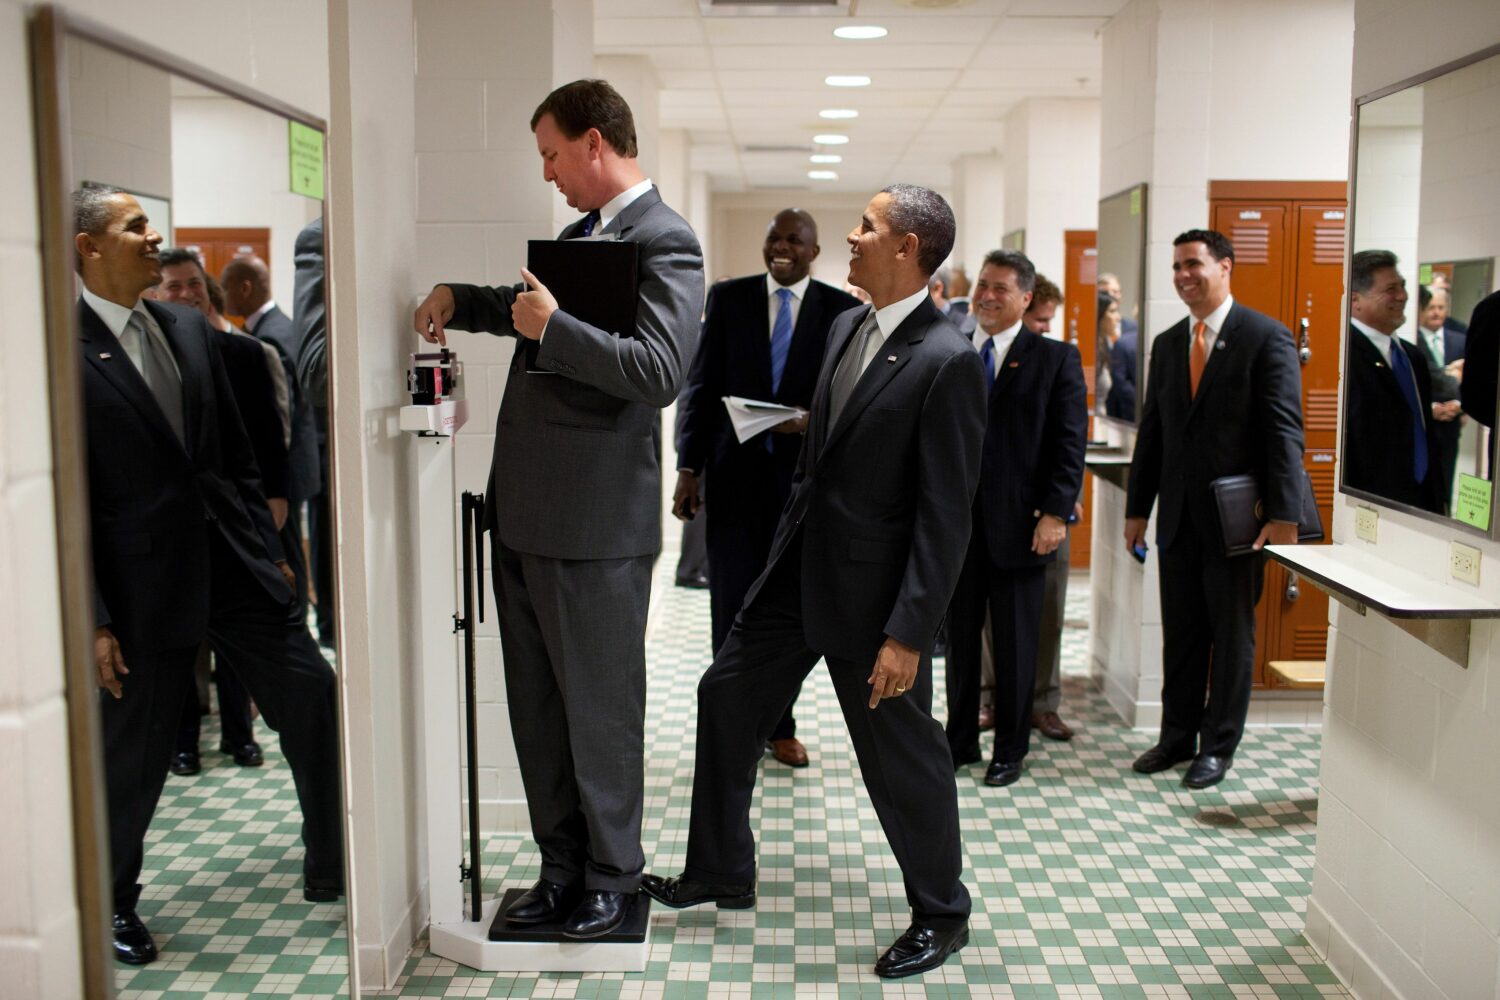 Pete Souza: Barack Obama jokingly puts his toe on the scale as Trip Director Marvin Nicholson weighs himself